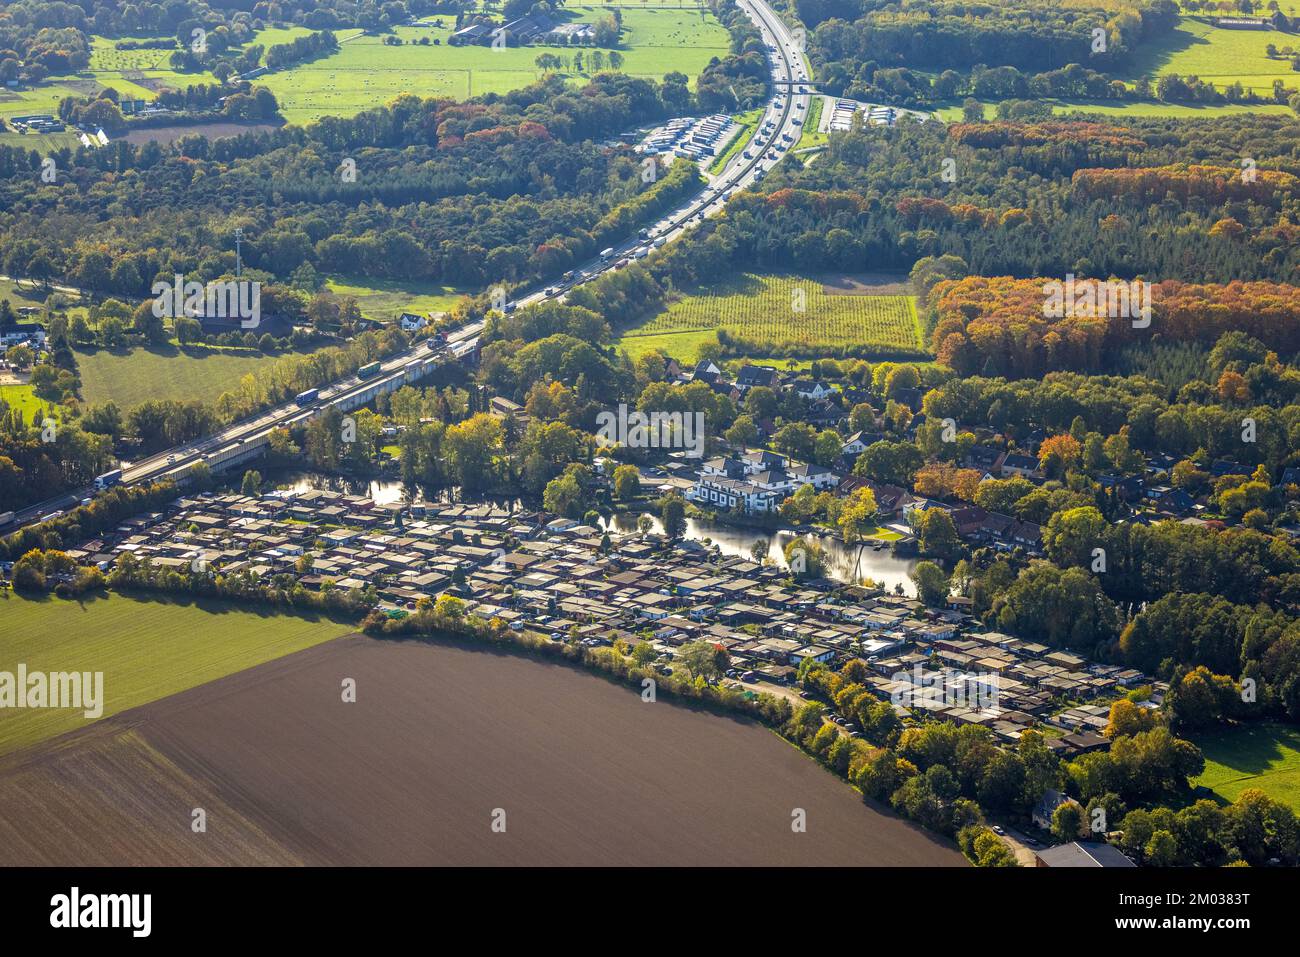 Aerial view, camping site Bej Wolters, camping site Schultes Kull, residential houses Neufelder Straße, Großer Parsick See, Vluyn, Neukirchen-Vluyn, R Stock Photo